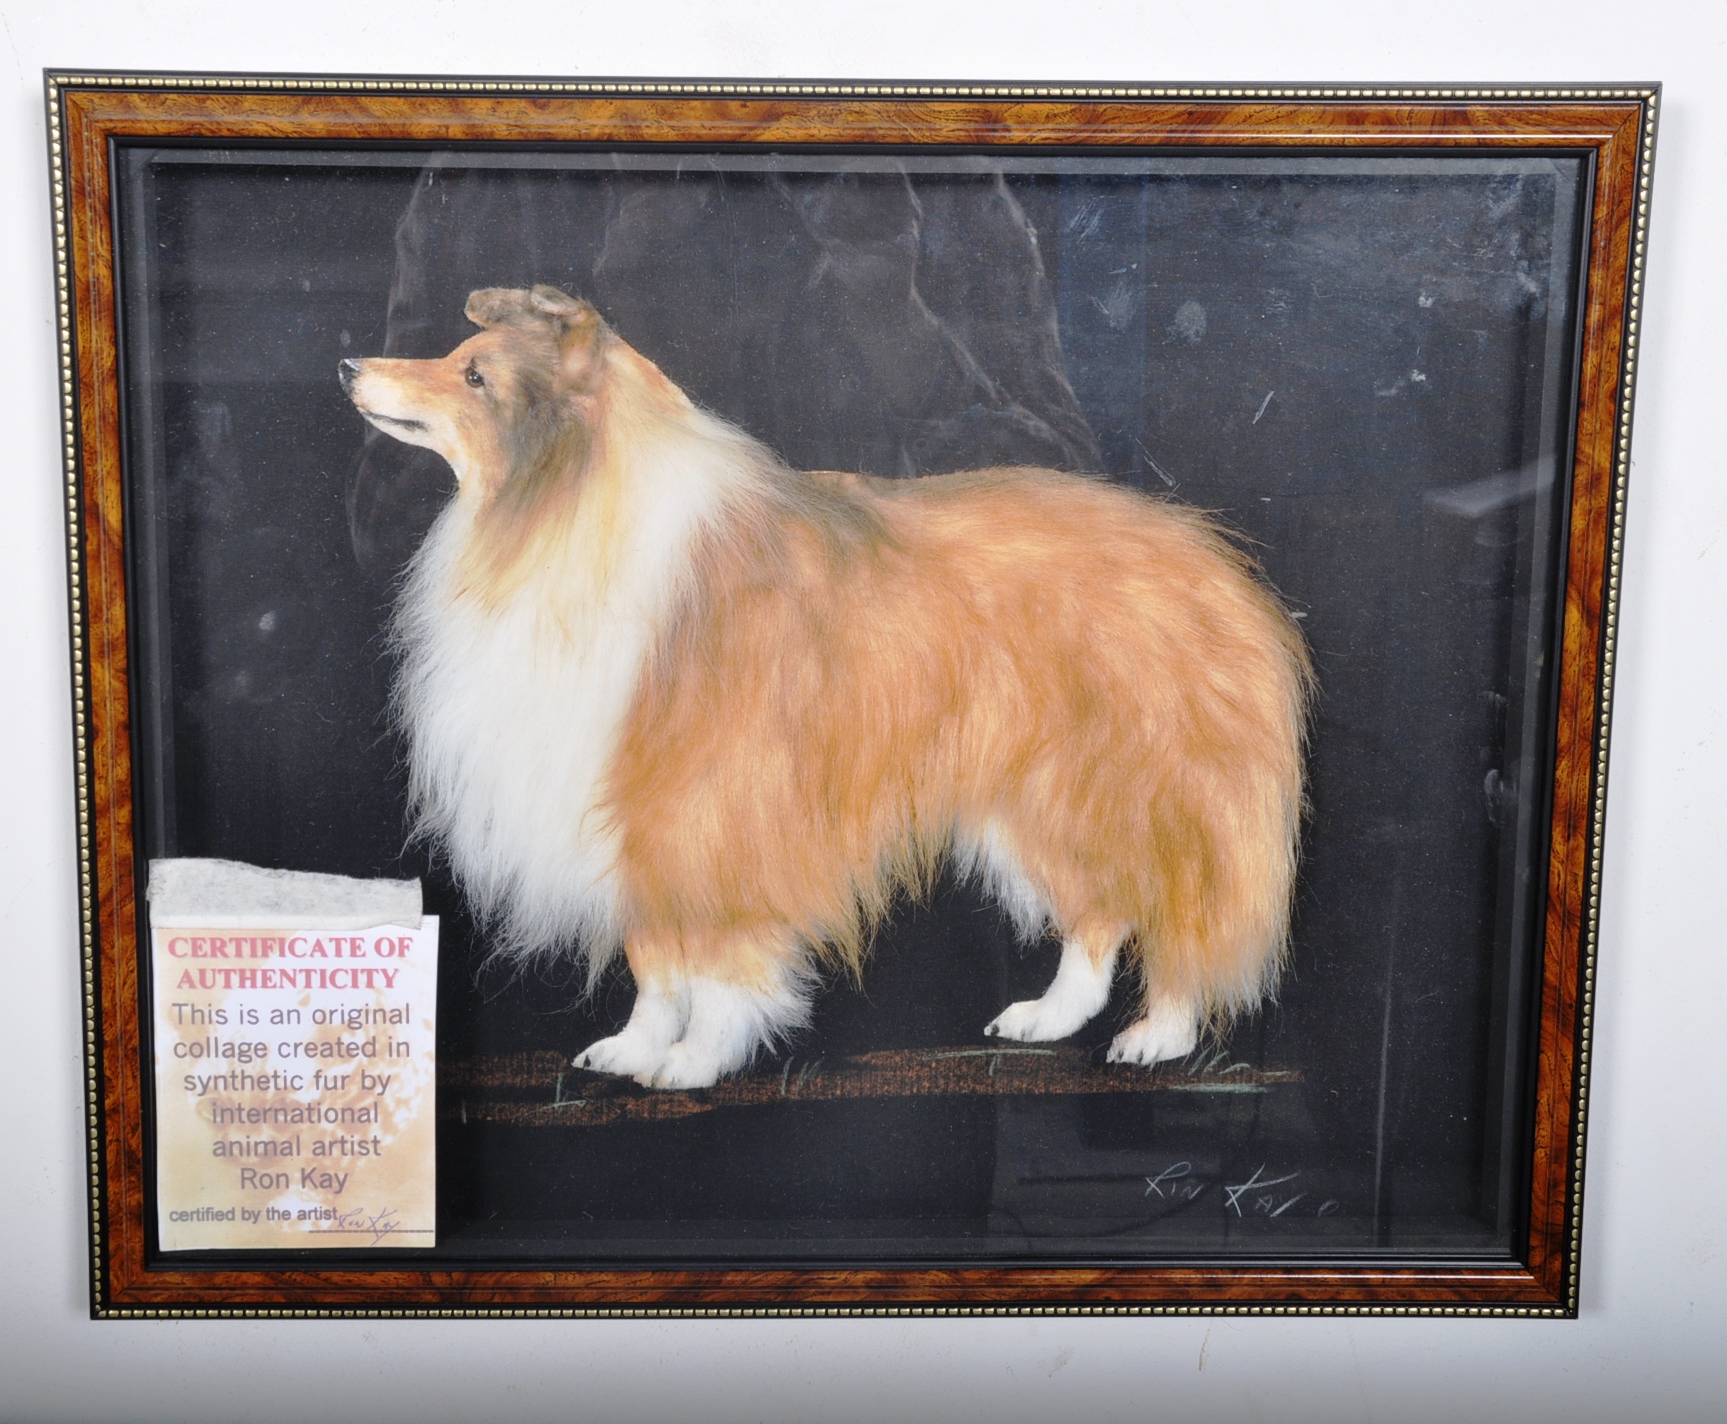 Ron Kay, A synthetic fur collage picture of a Collie dog. 50cm x 40cm